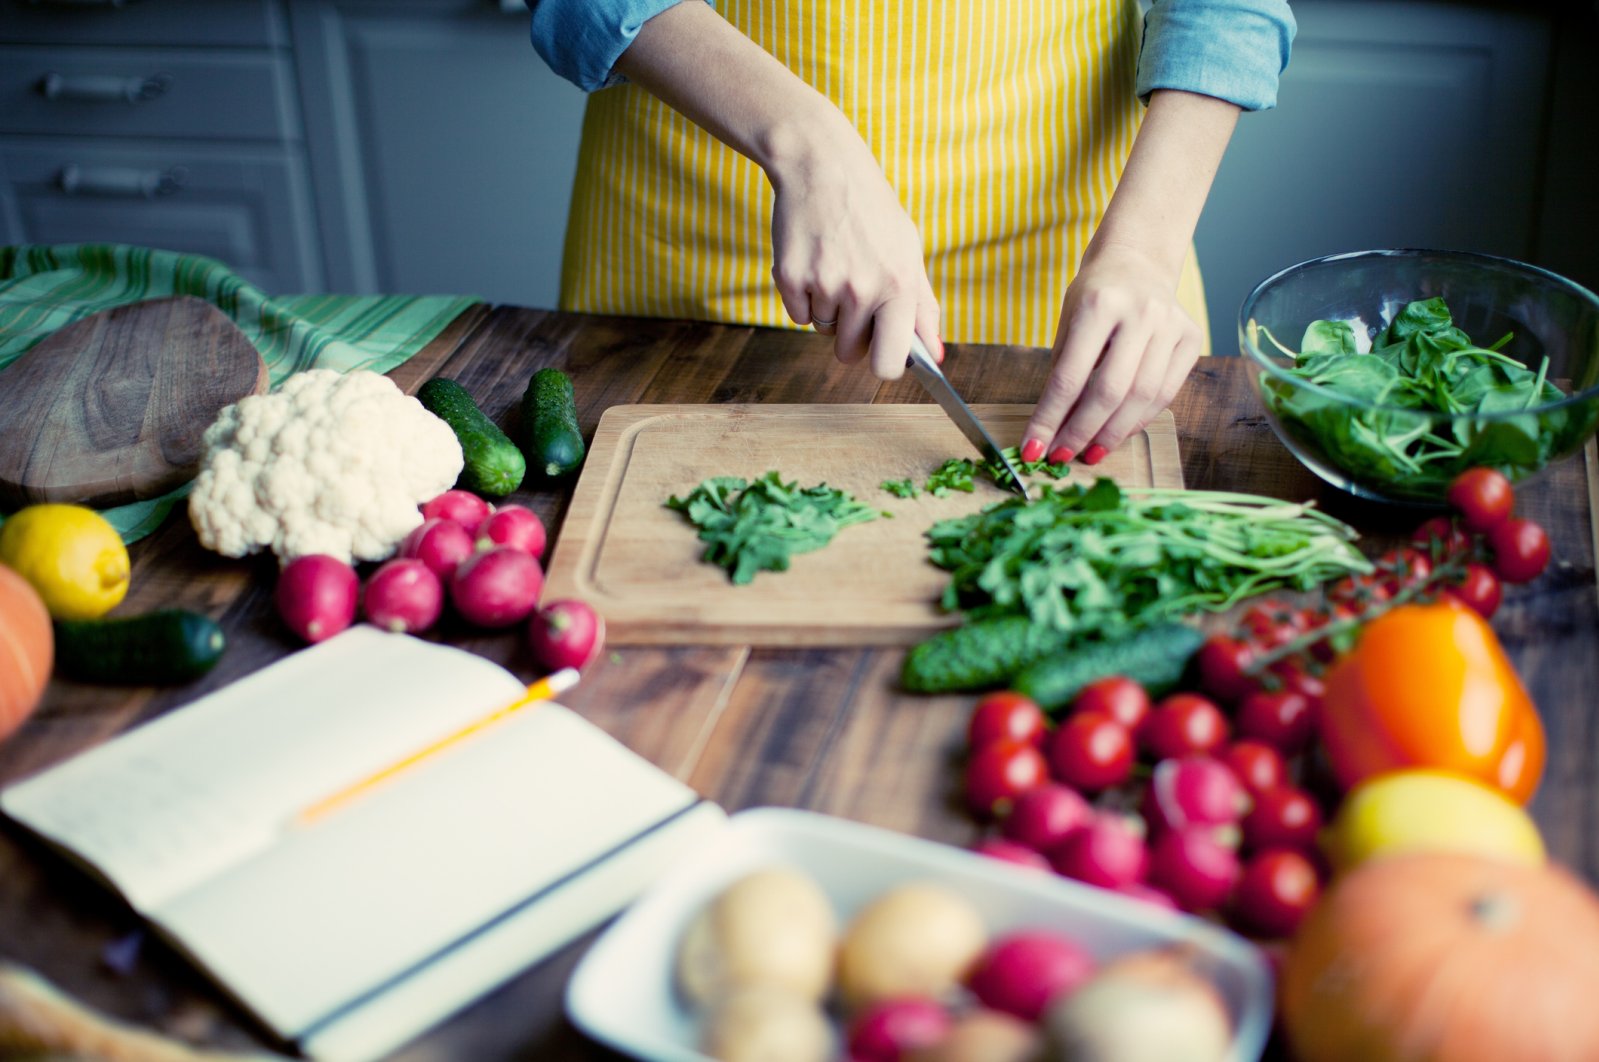 Given everyone is stuck at home due to the pandemic, lots of people are cooking, writing and creating as a way to cope. (iStock Photo)